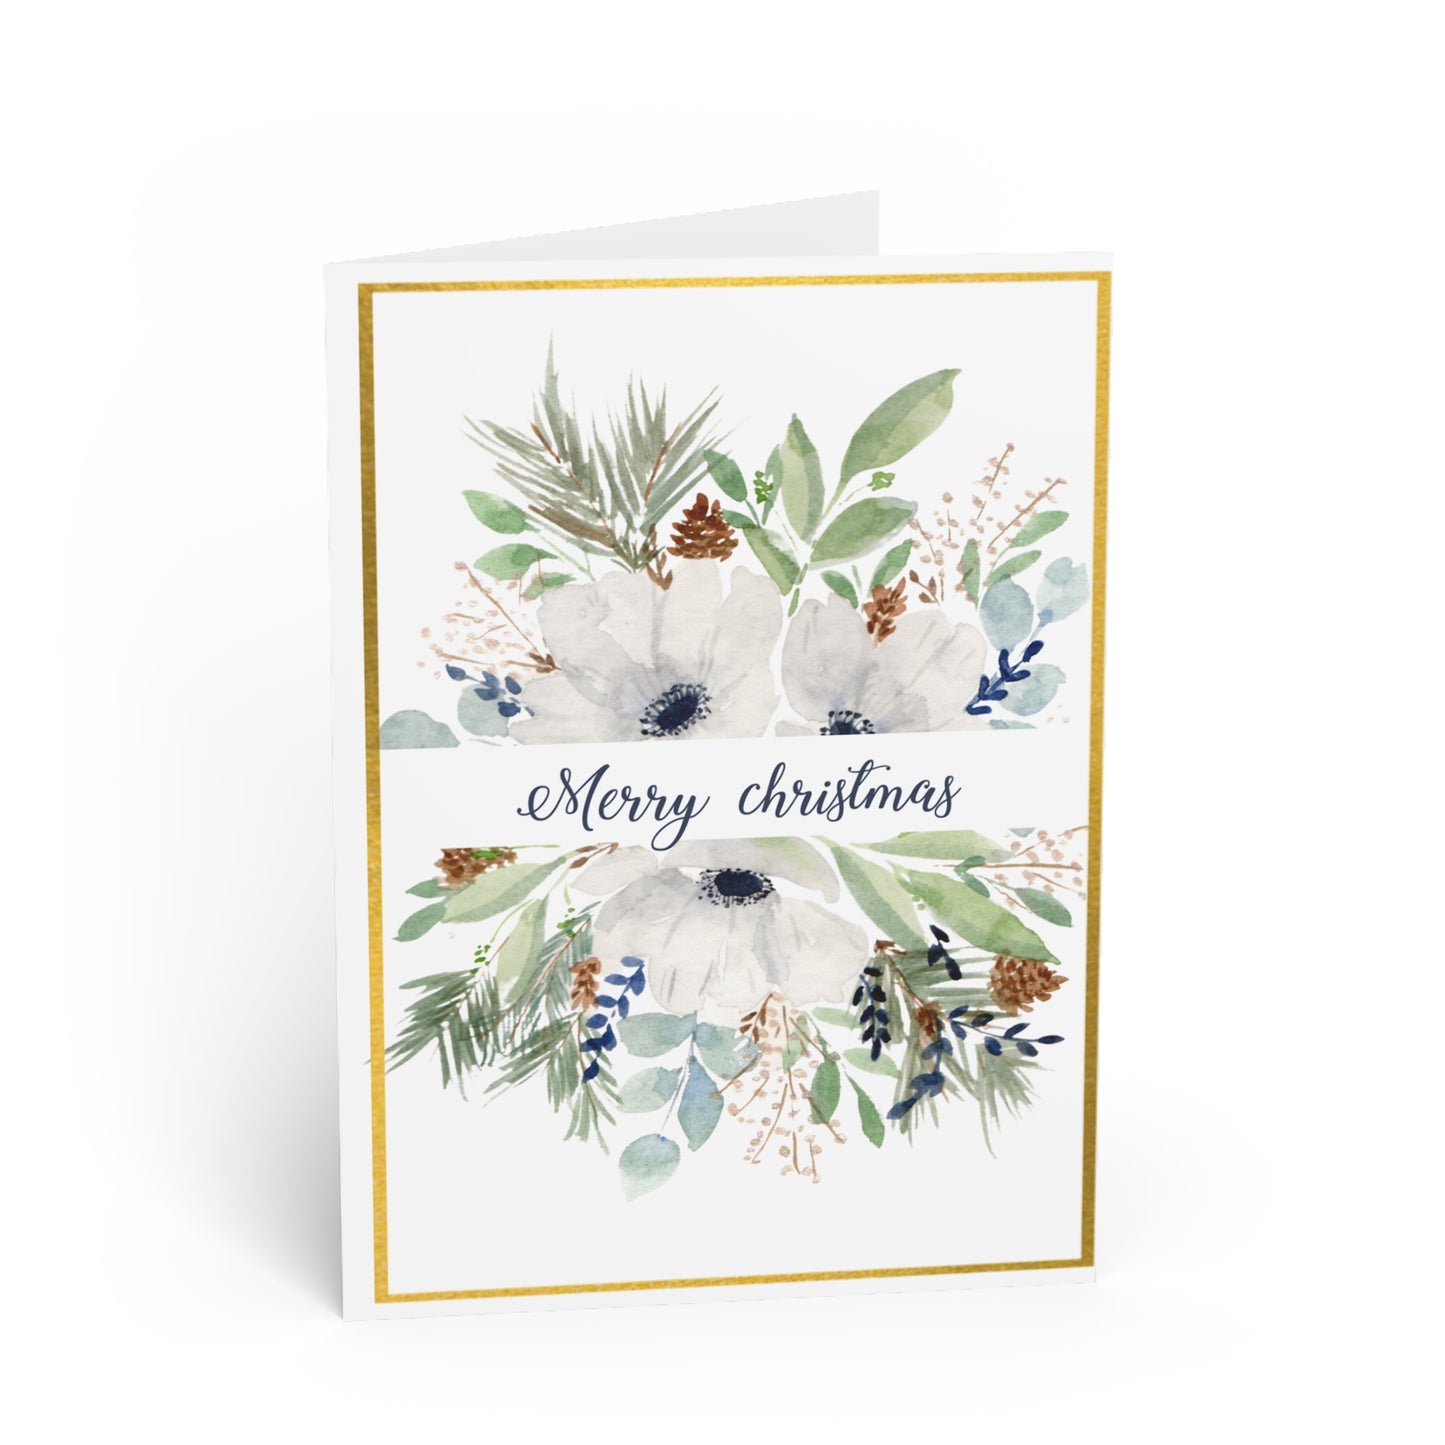 Merry Christmas Handmade card with watercolor illustration